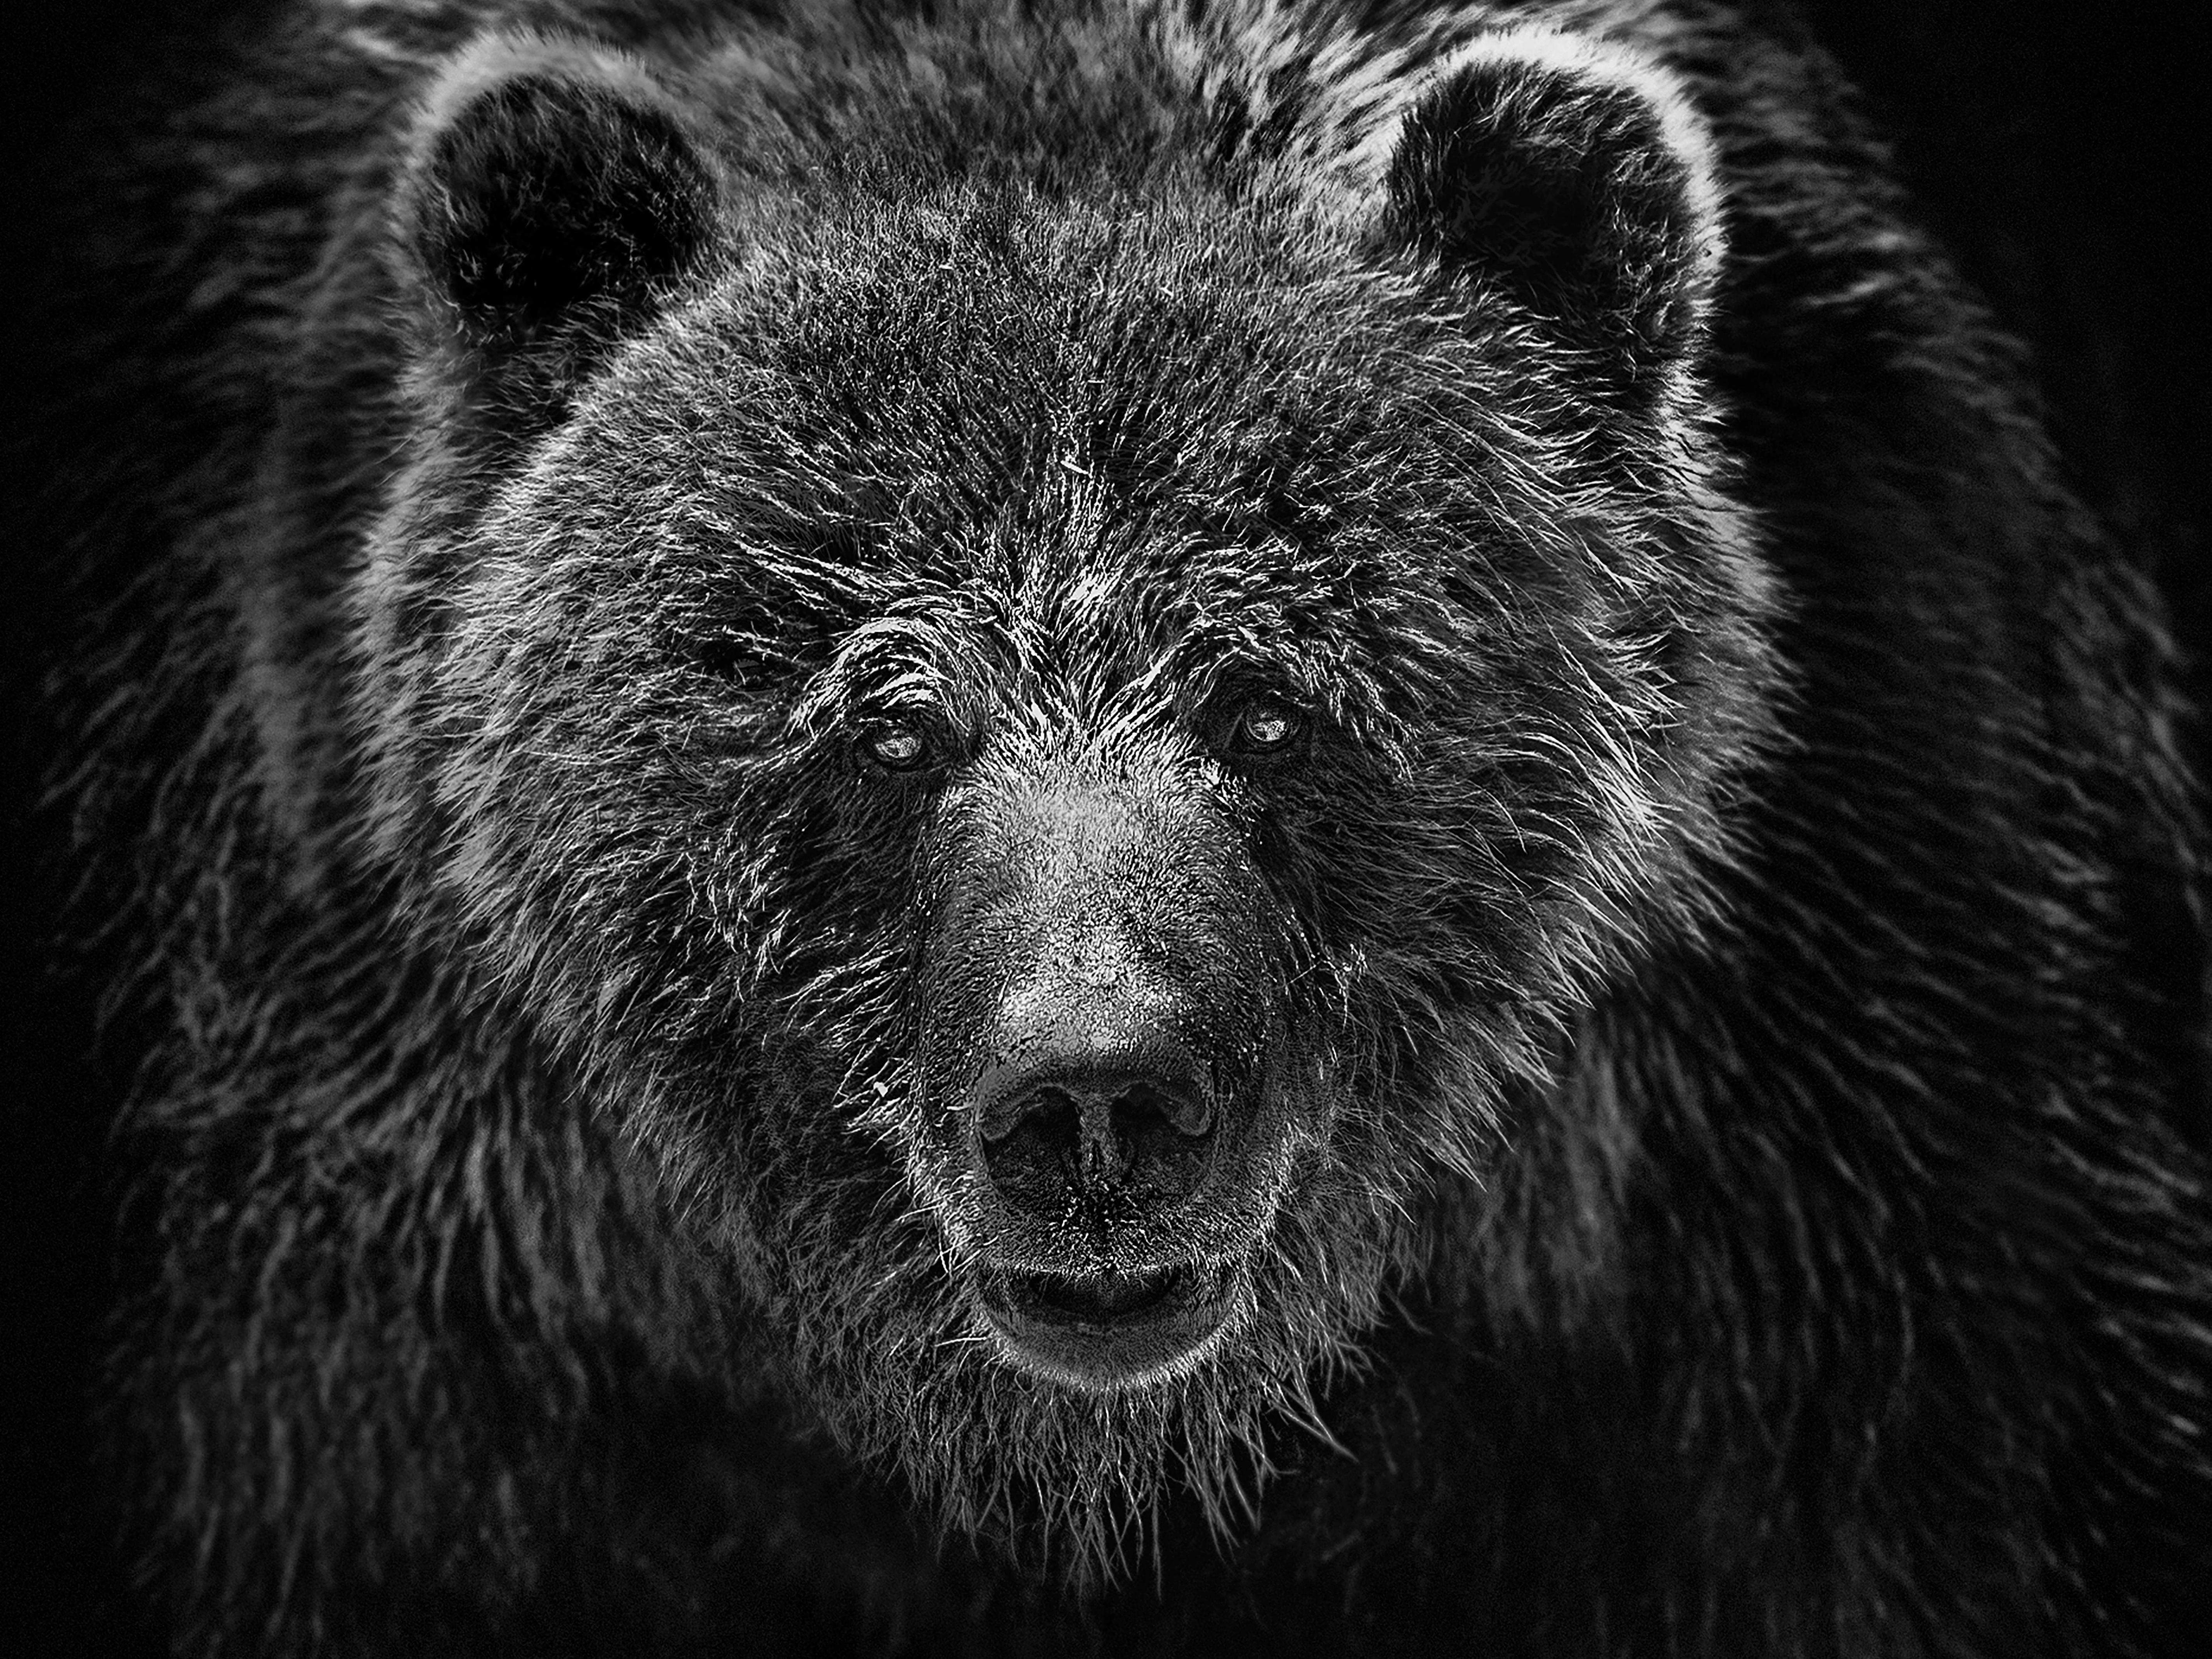 Grizzly Portrait
An rare look into the eyse of an apex predator
40x60 Edition of 10. Signed by Shane.  
Printed on archival paper and using archival inks
 Framing available. Inquire for rates.   

 Shane Russeck has built a reputation for capturing